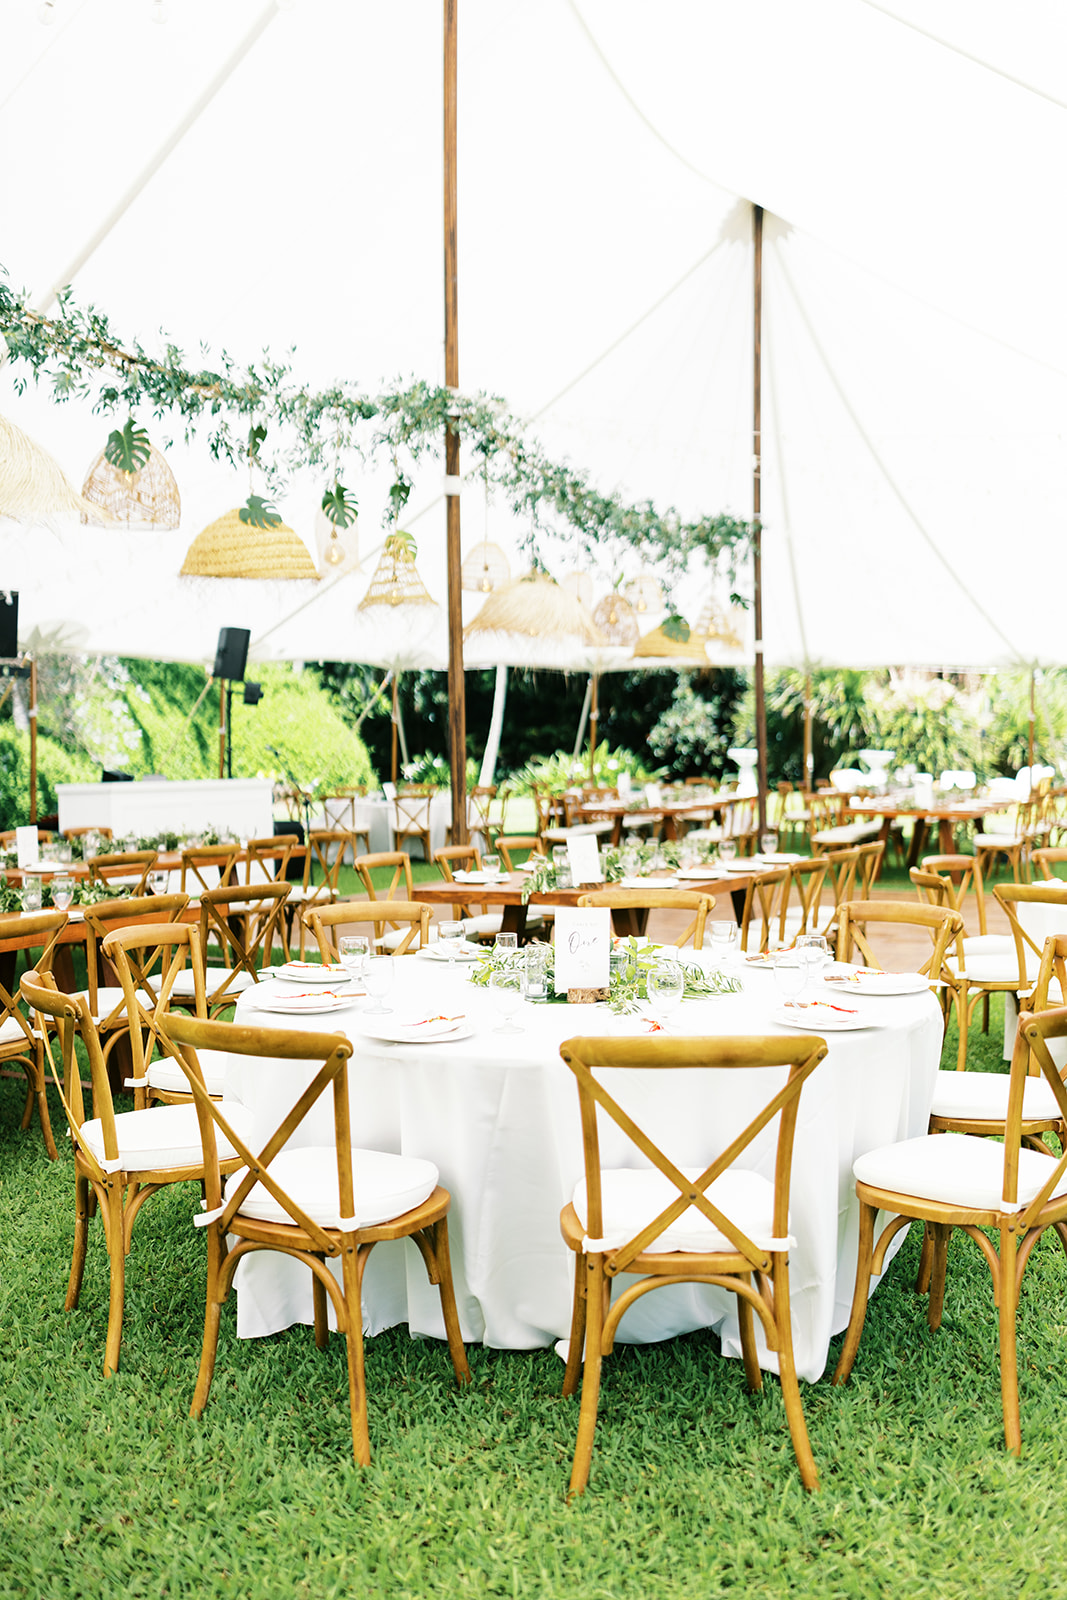 Outdoor wedding reception setup with bamboo chairs, white tablecloths, and hanging greenery under a white tent.